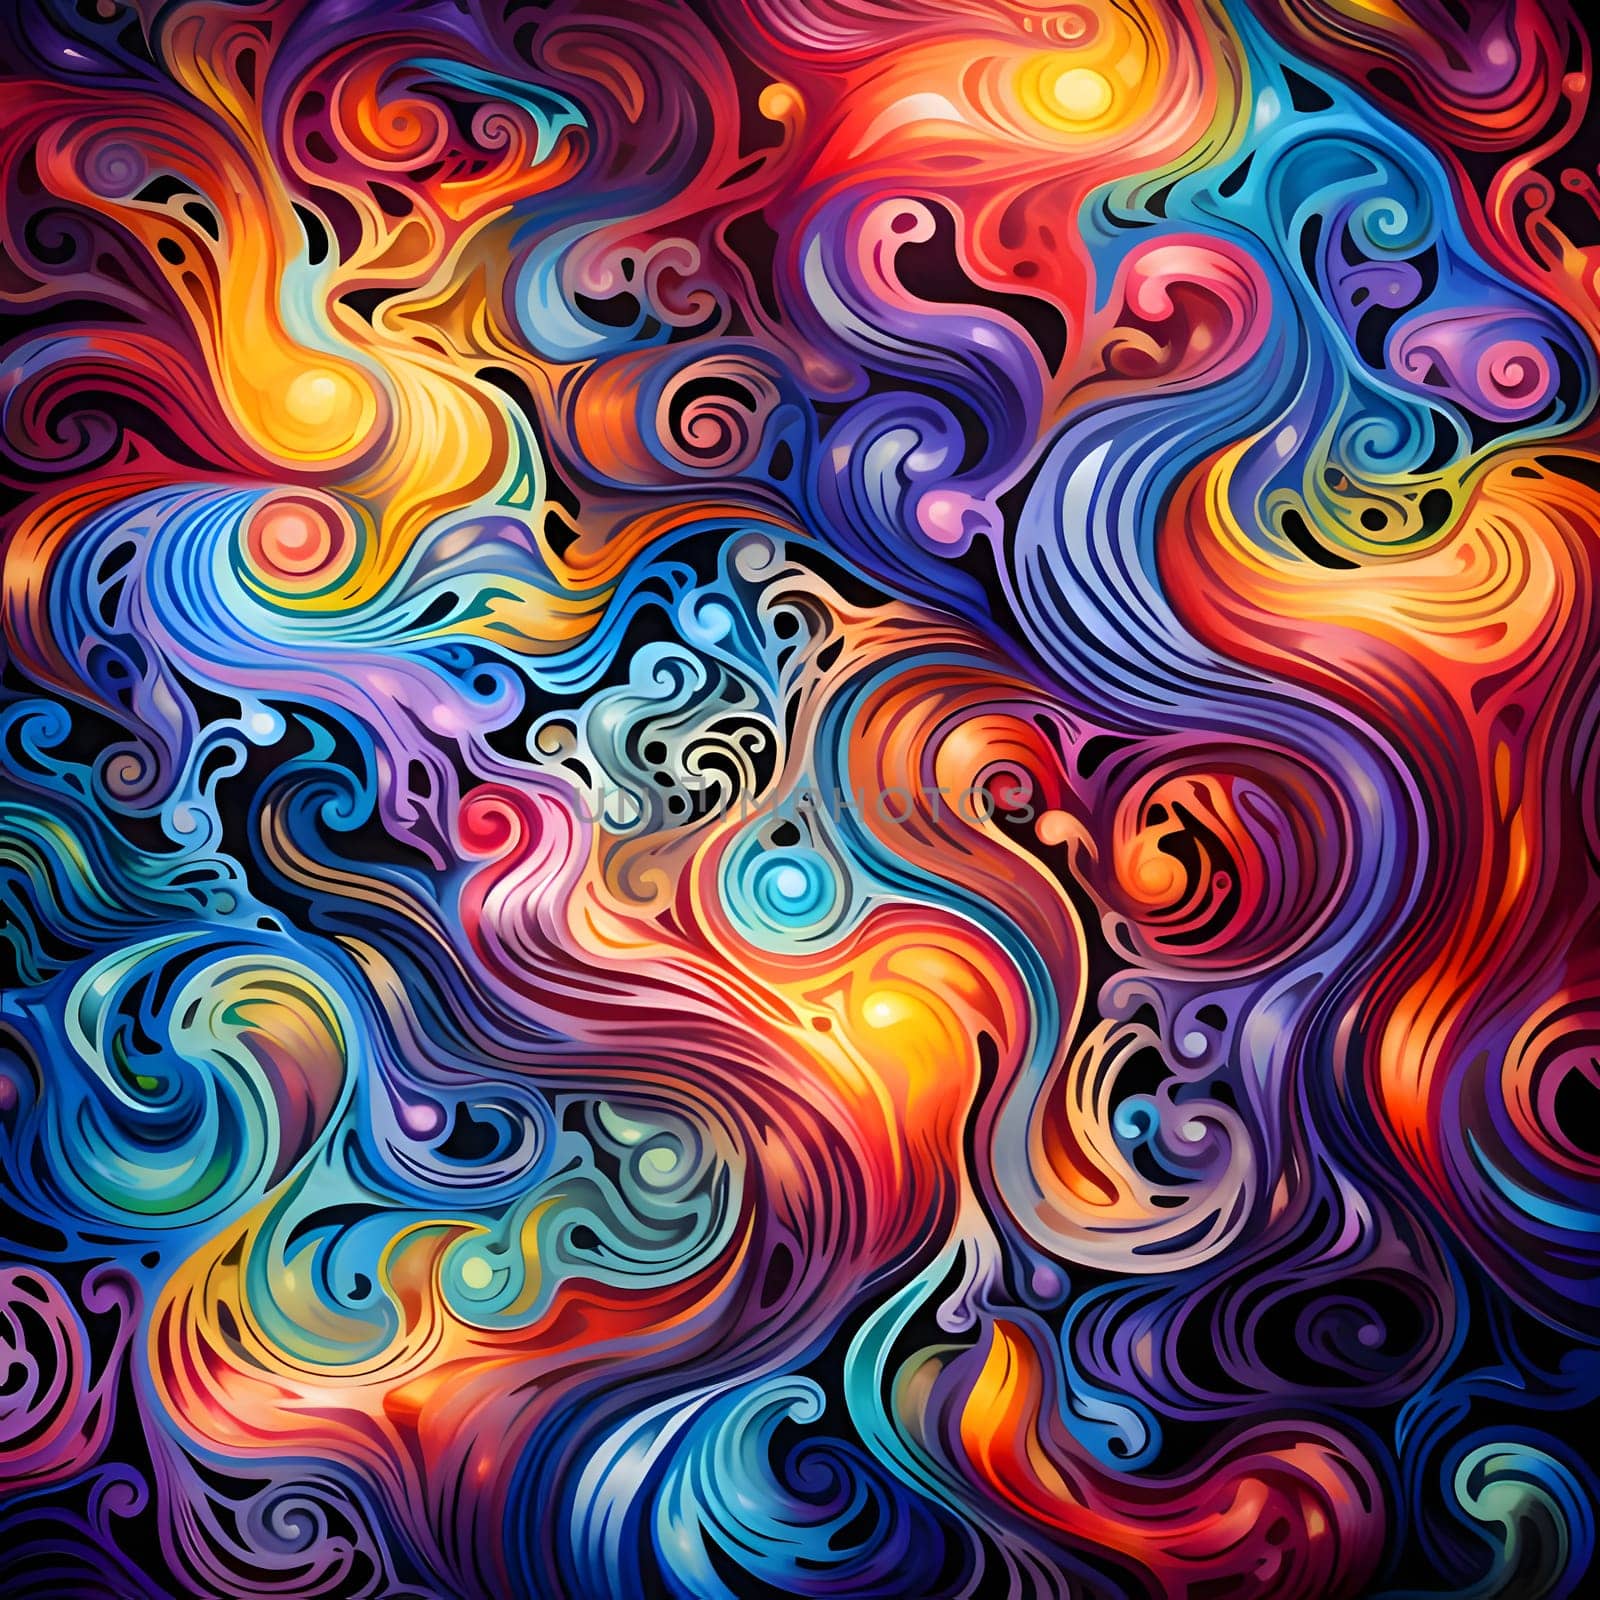 Abstract colorful background with swirls. Vector illustration. EPS 10. by ThemesS